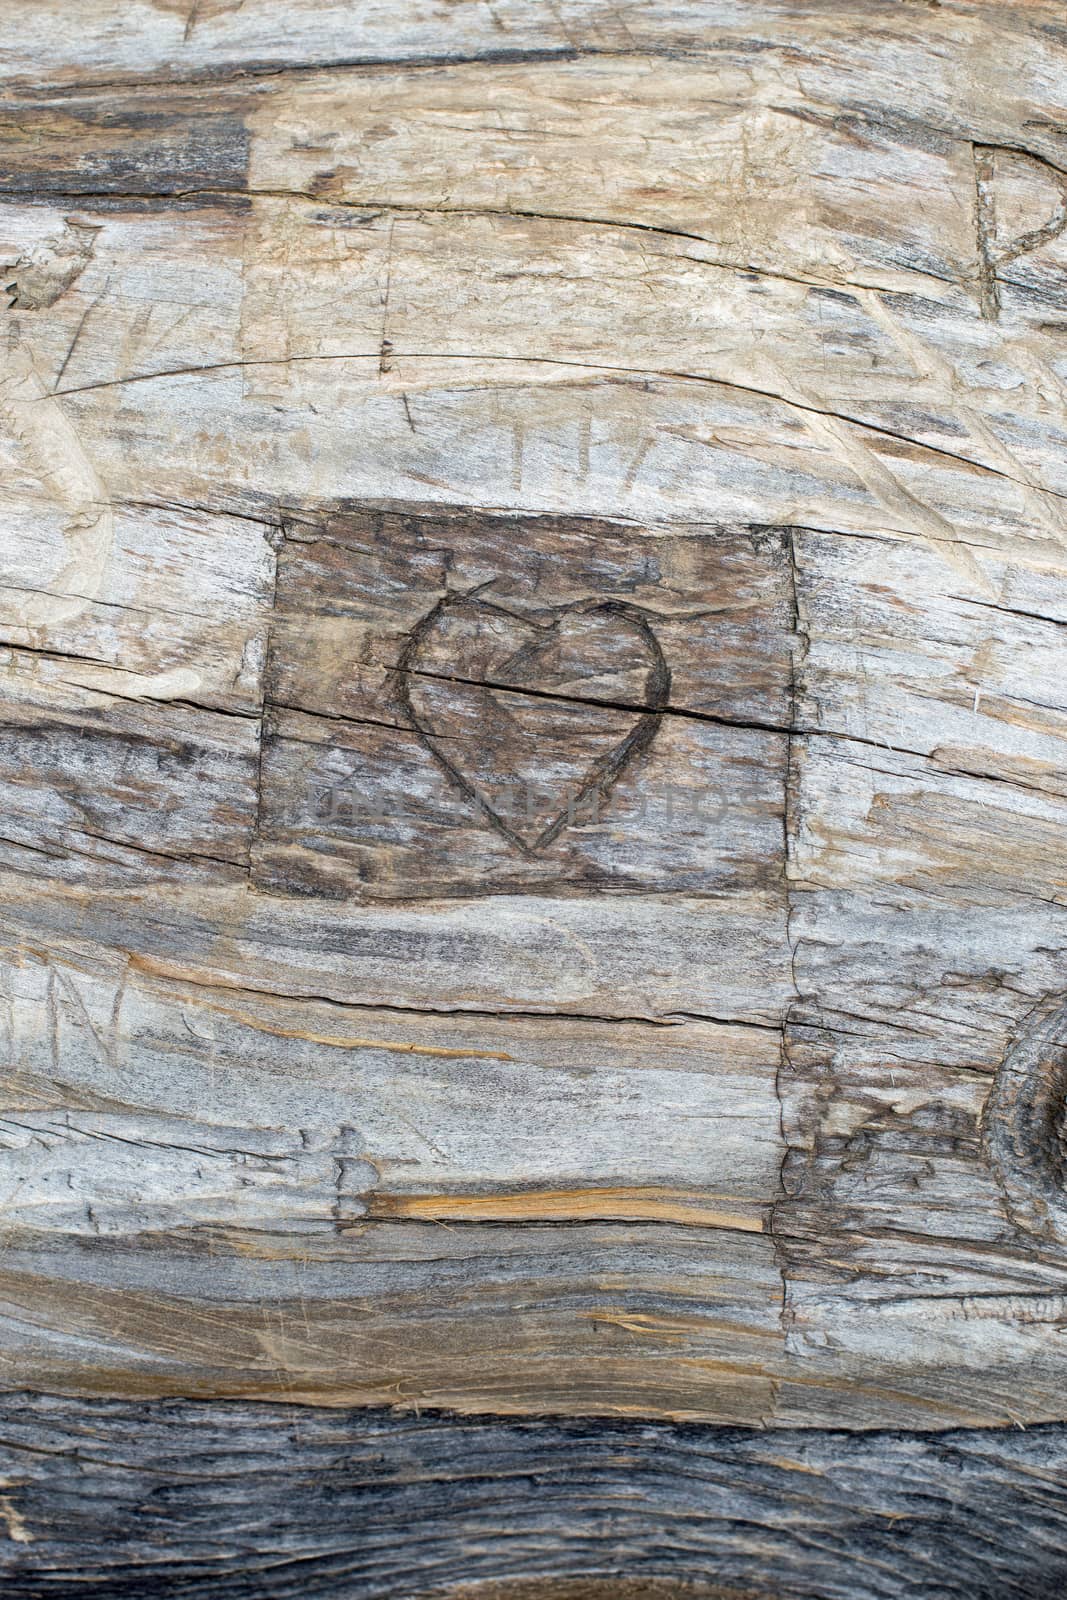 A carved heart in a tree trunk